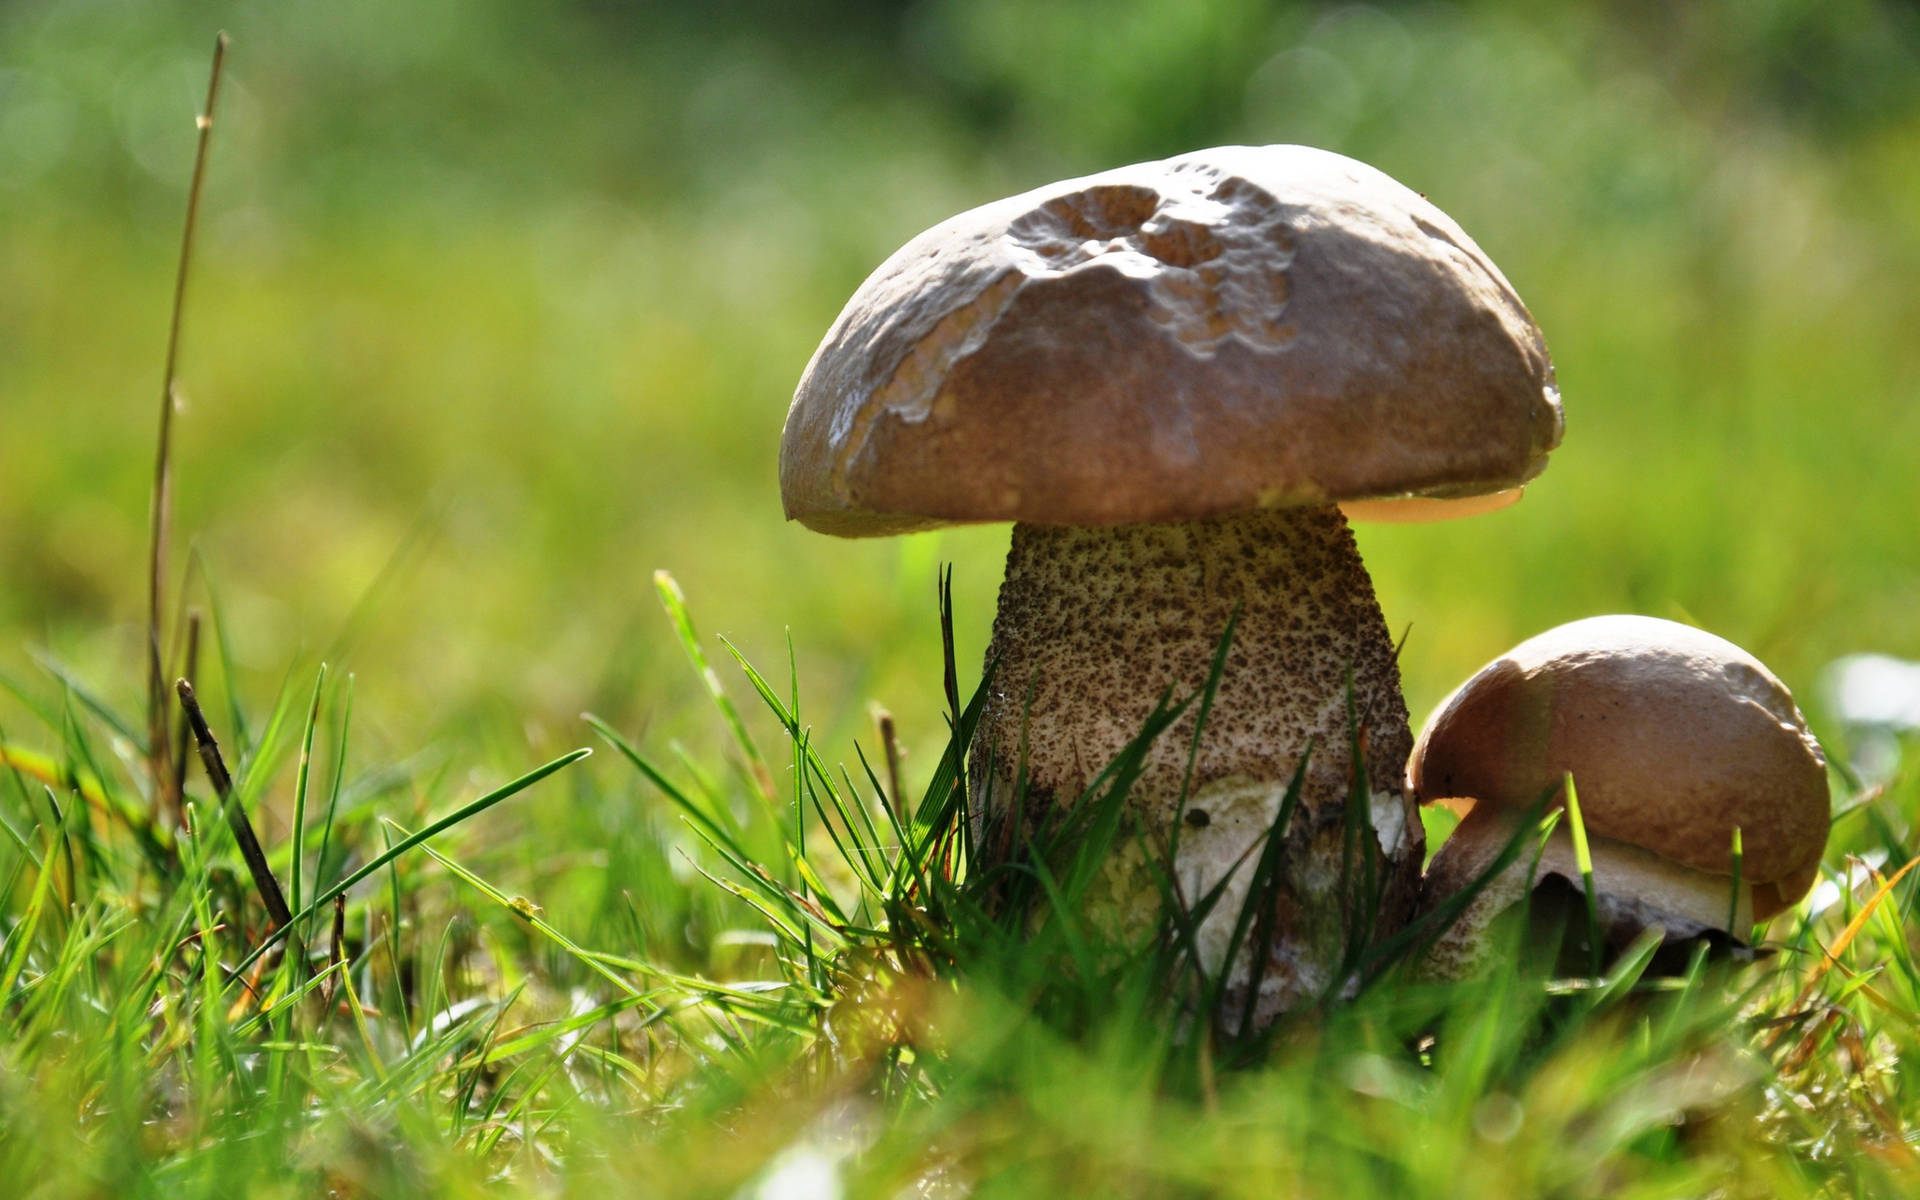 Cute Mushrooms Of Different Sizes On Grass Background